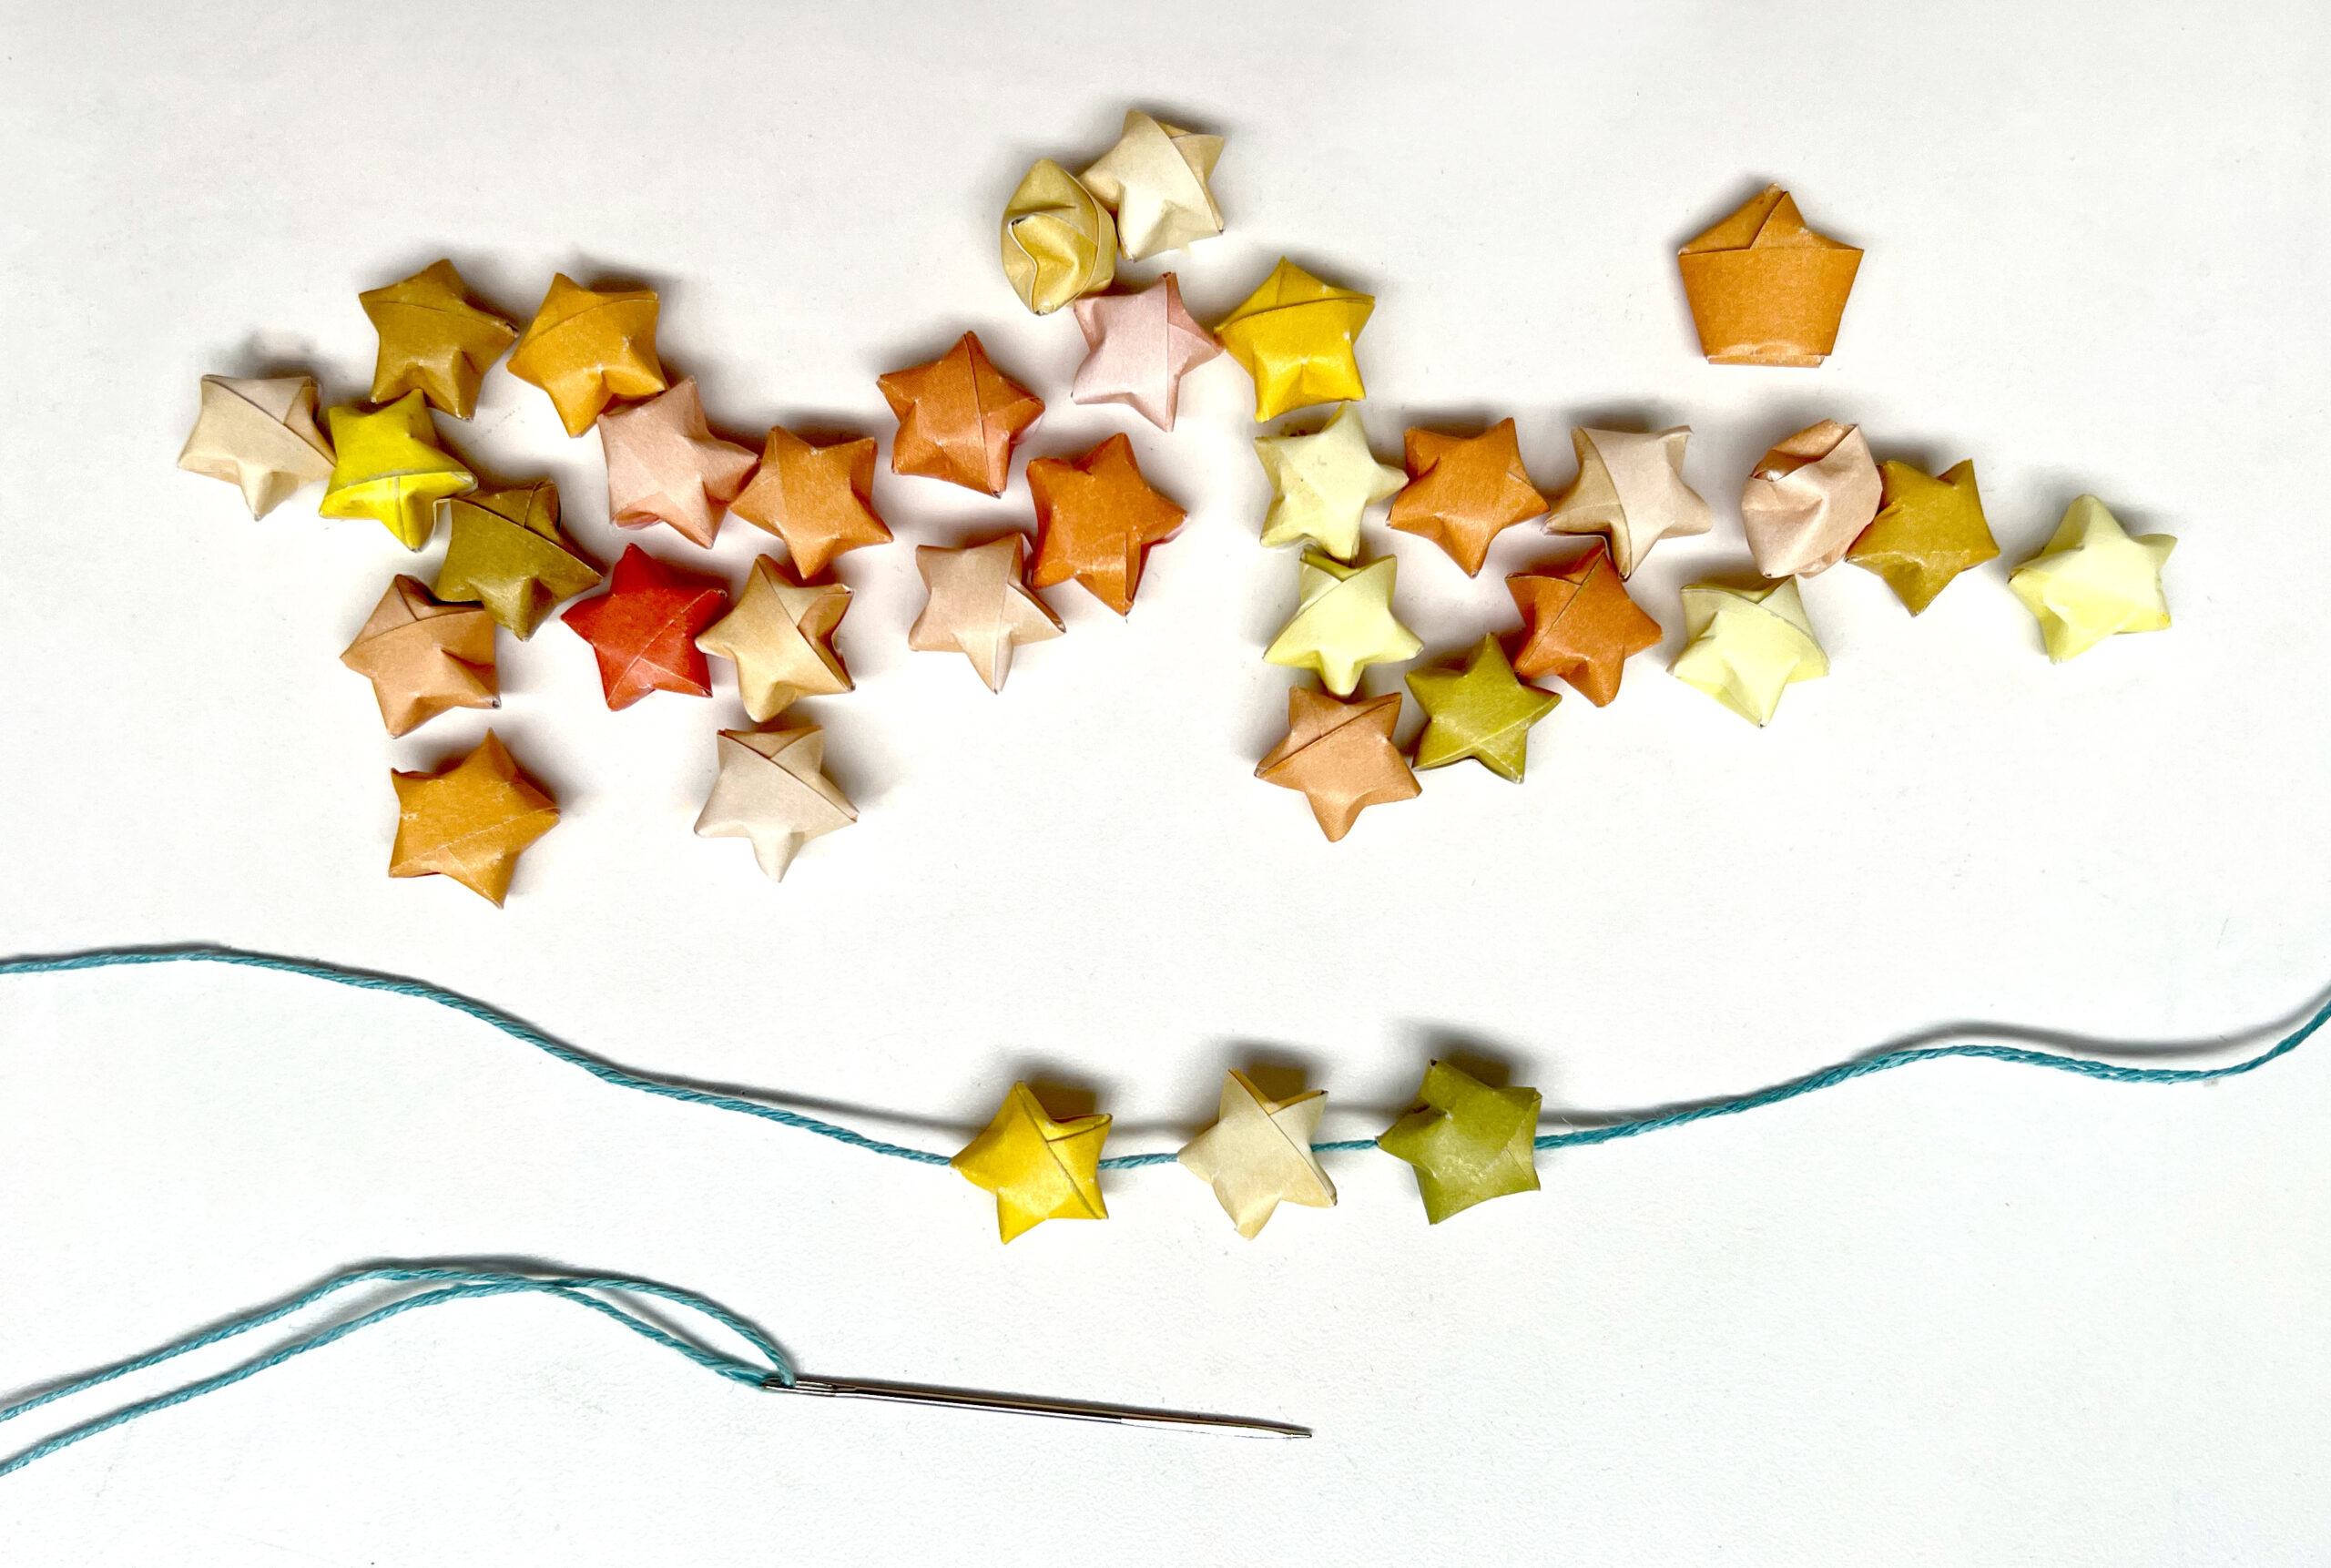 image of a pile of colorful paper stars getting strung together with needle and thread
